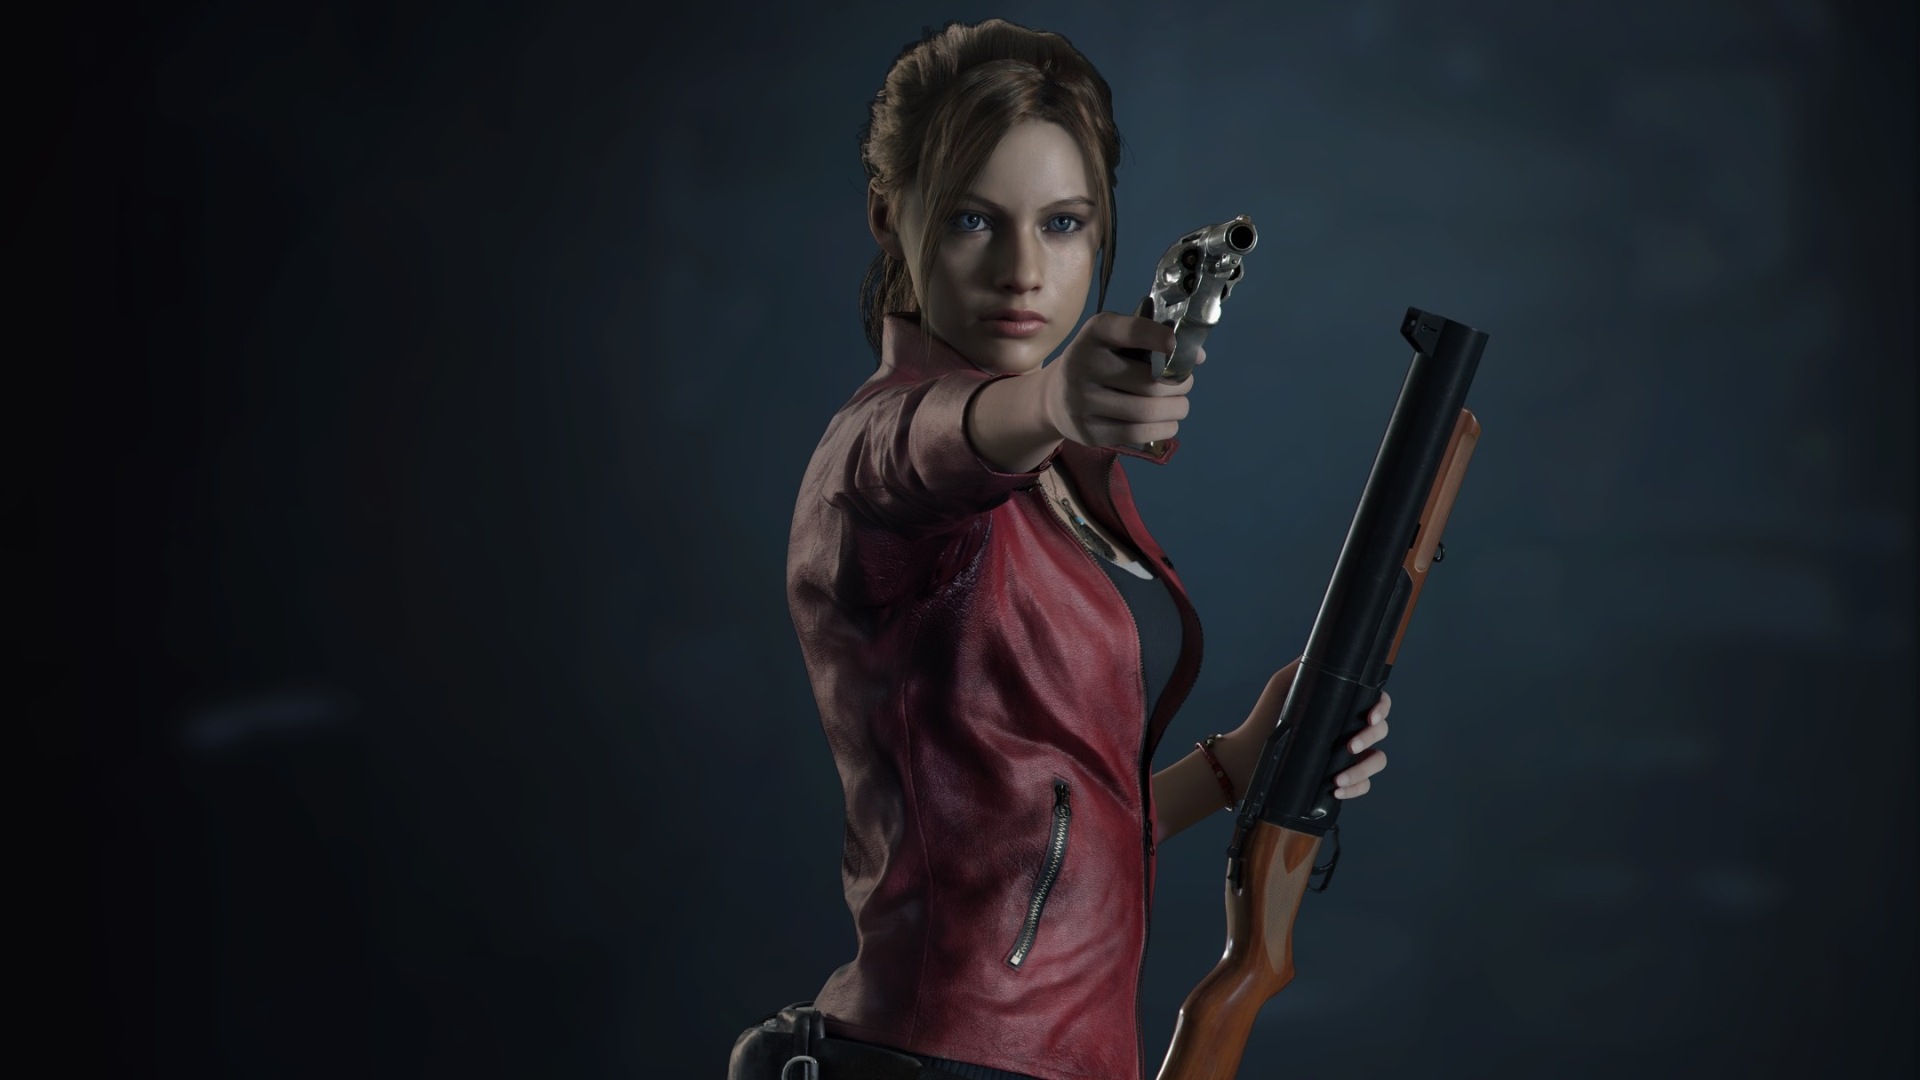 Wallpapers Claire Redfield resident evil 2 games on the desktop